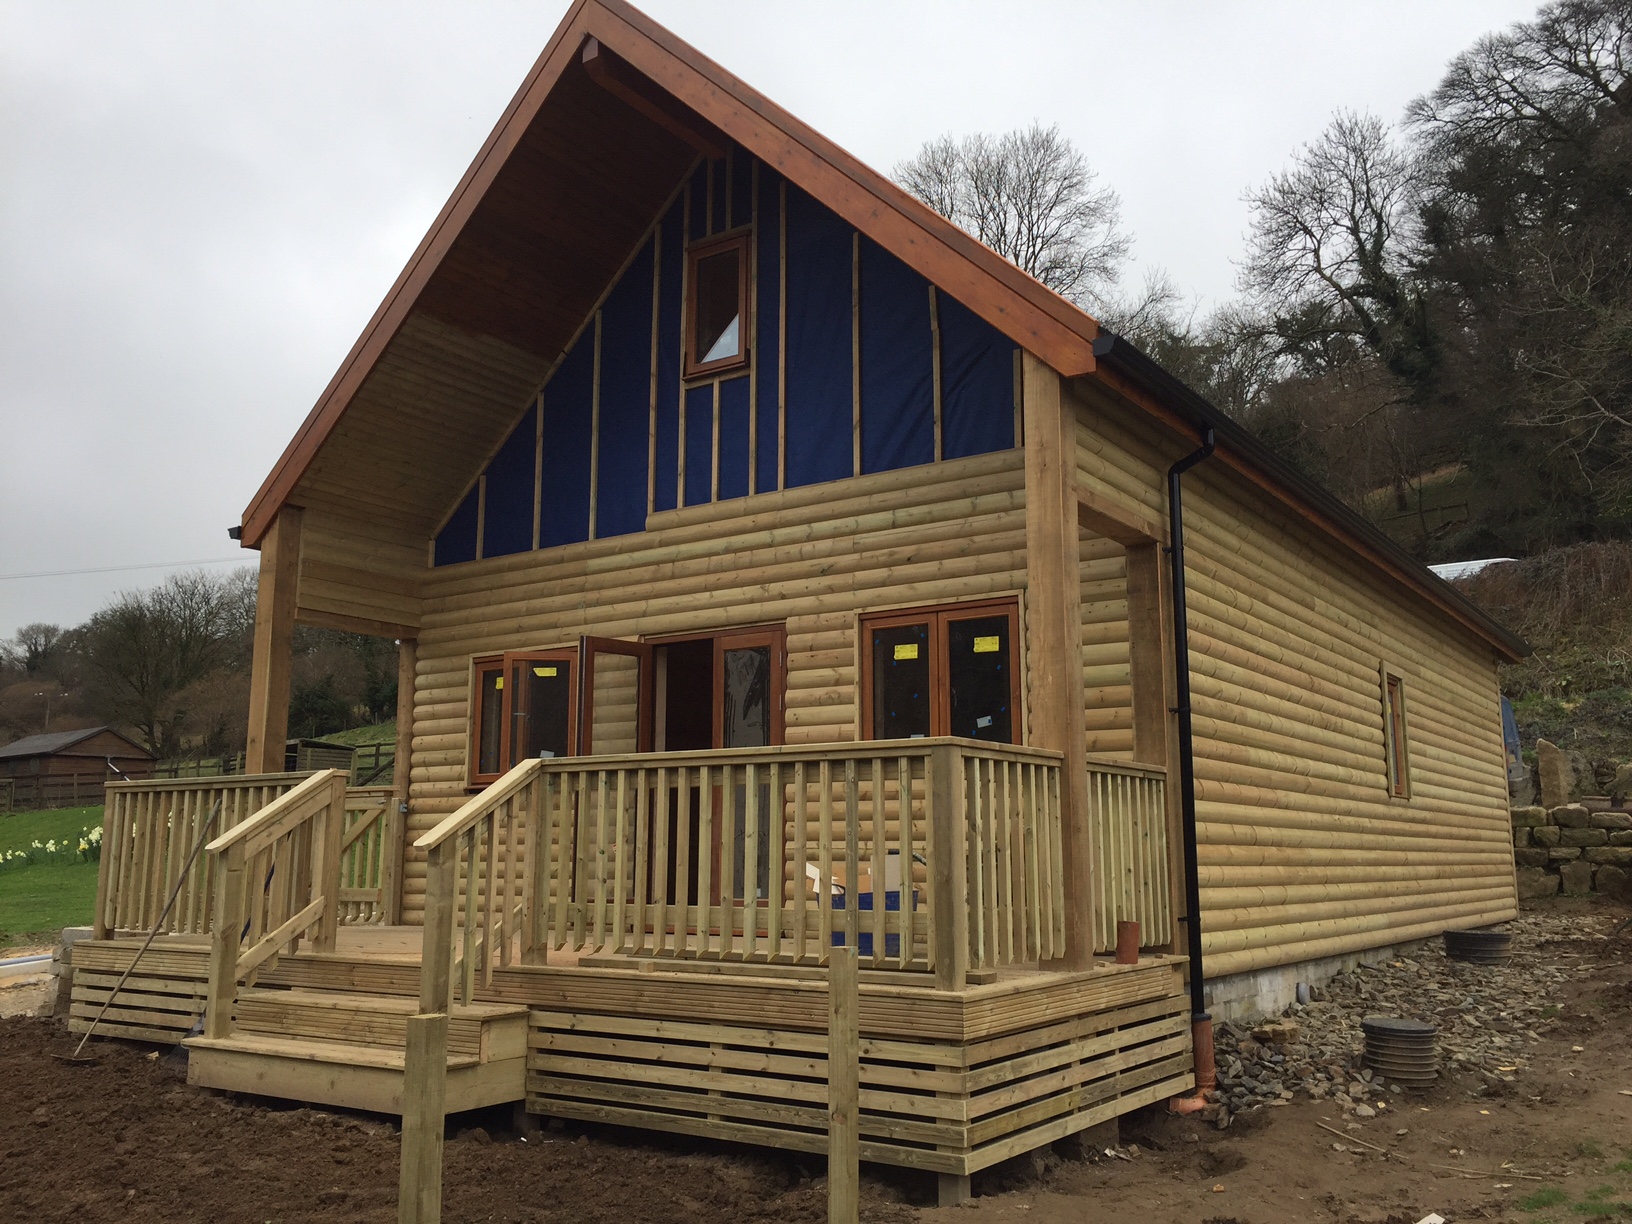 Nearley finished – Coombe Mill residential cabin